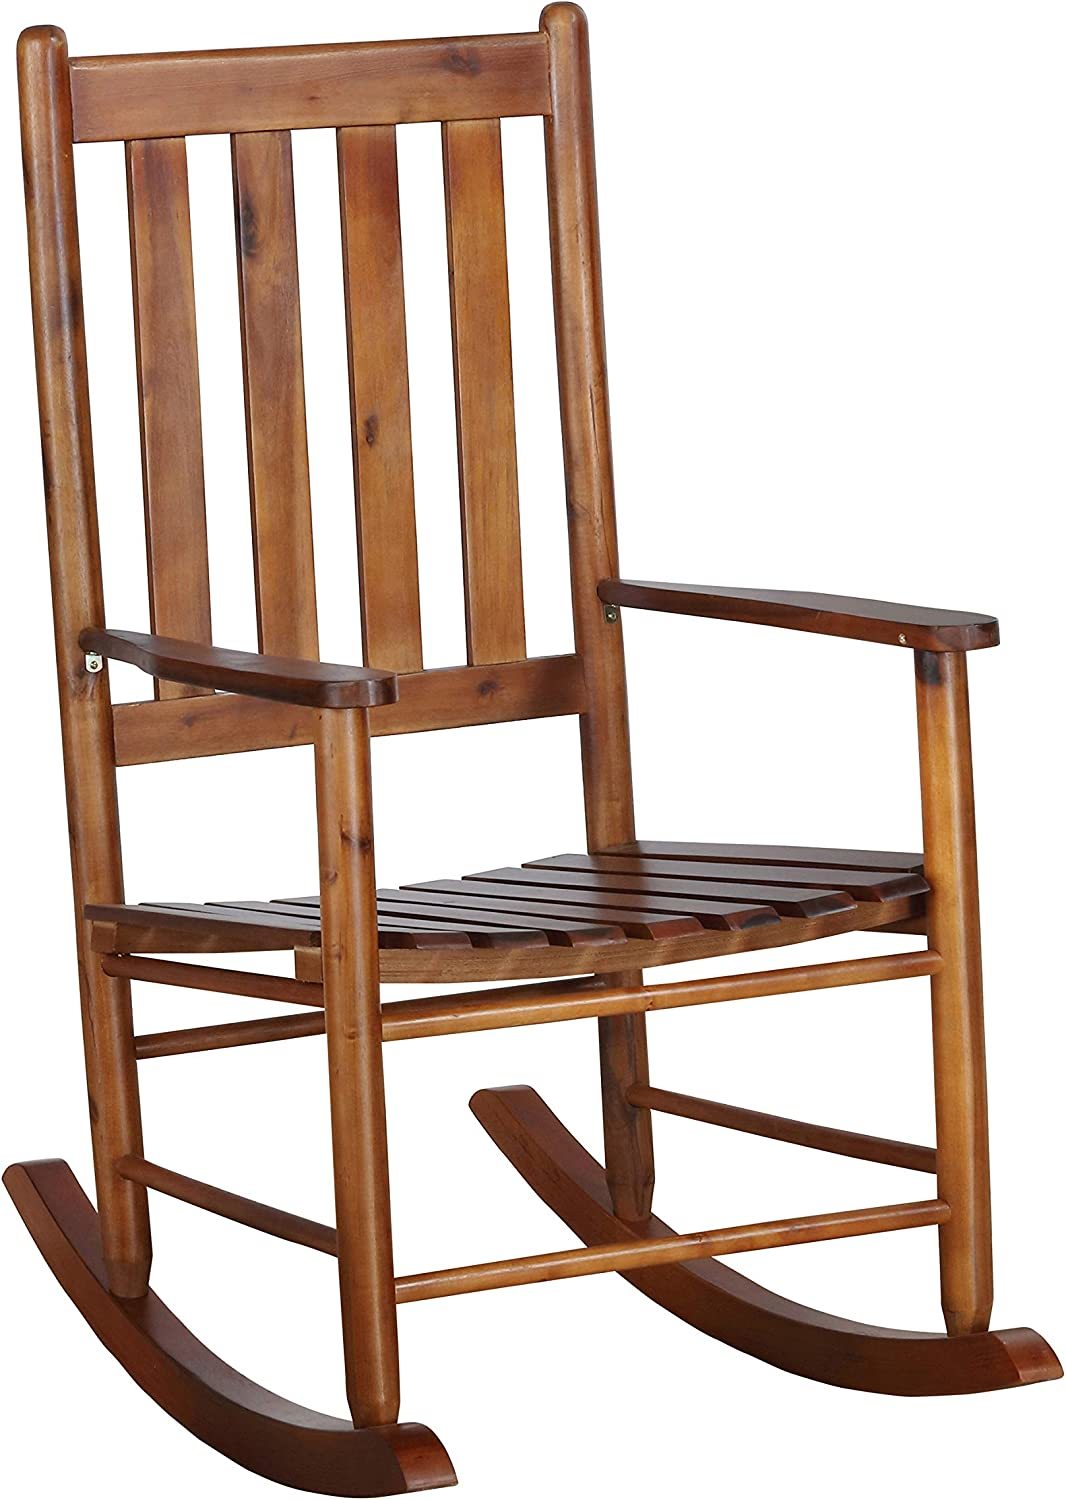 Slat Back Wooden Golden Brown Rocking Chair From Coaster Home Furnishings. - $121.93